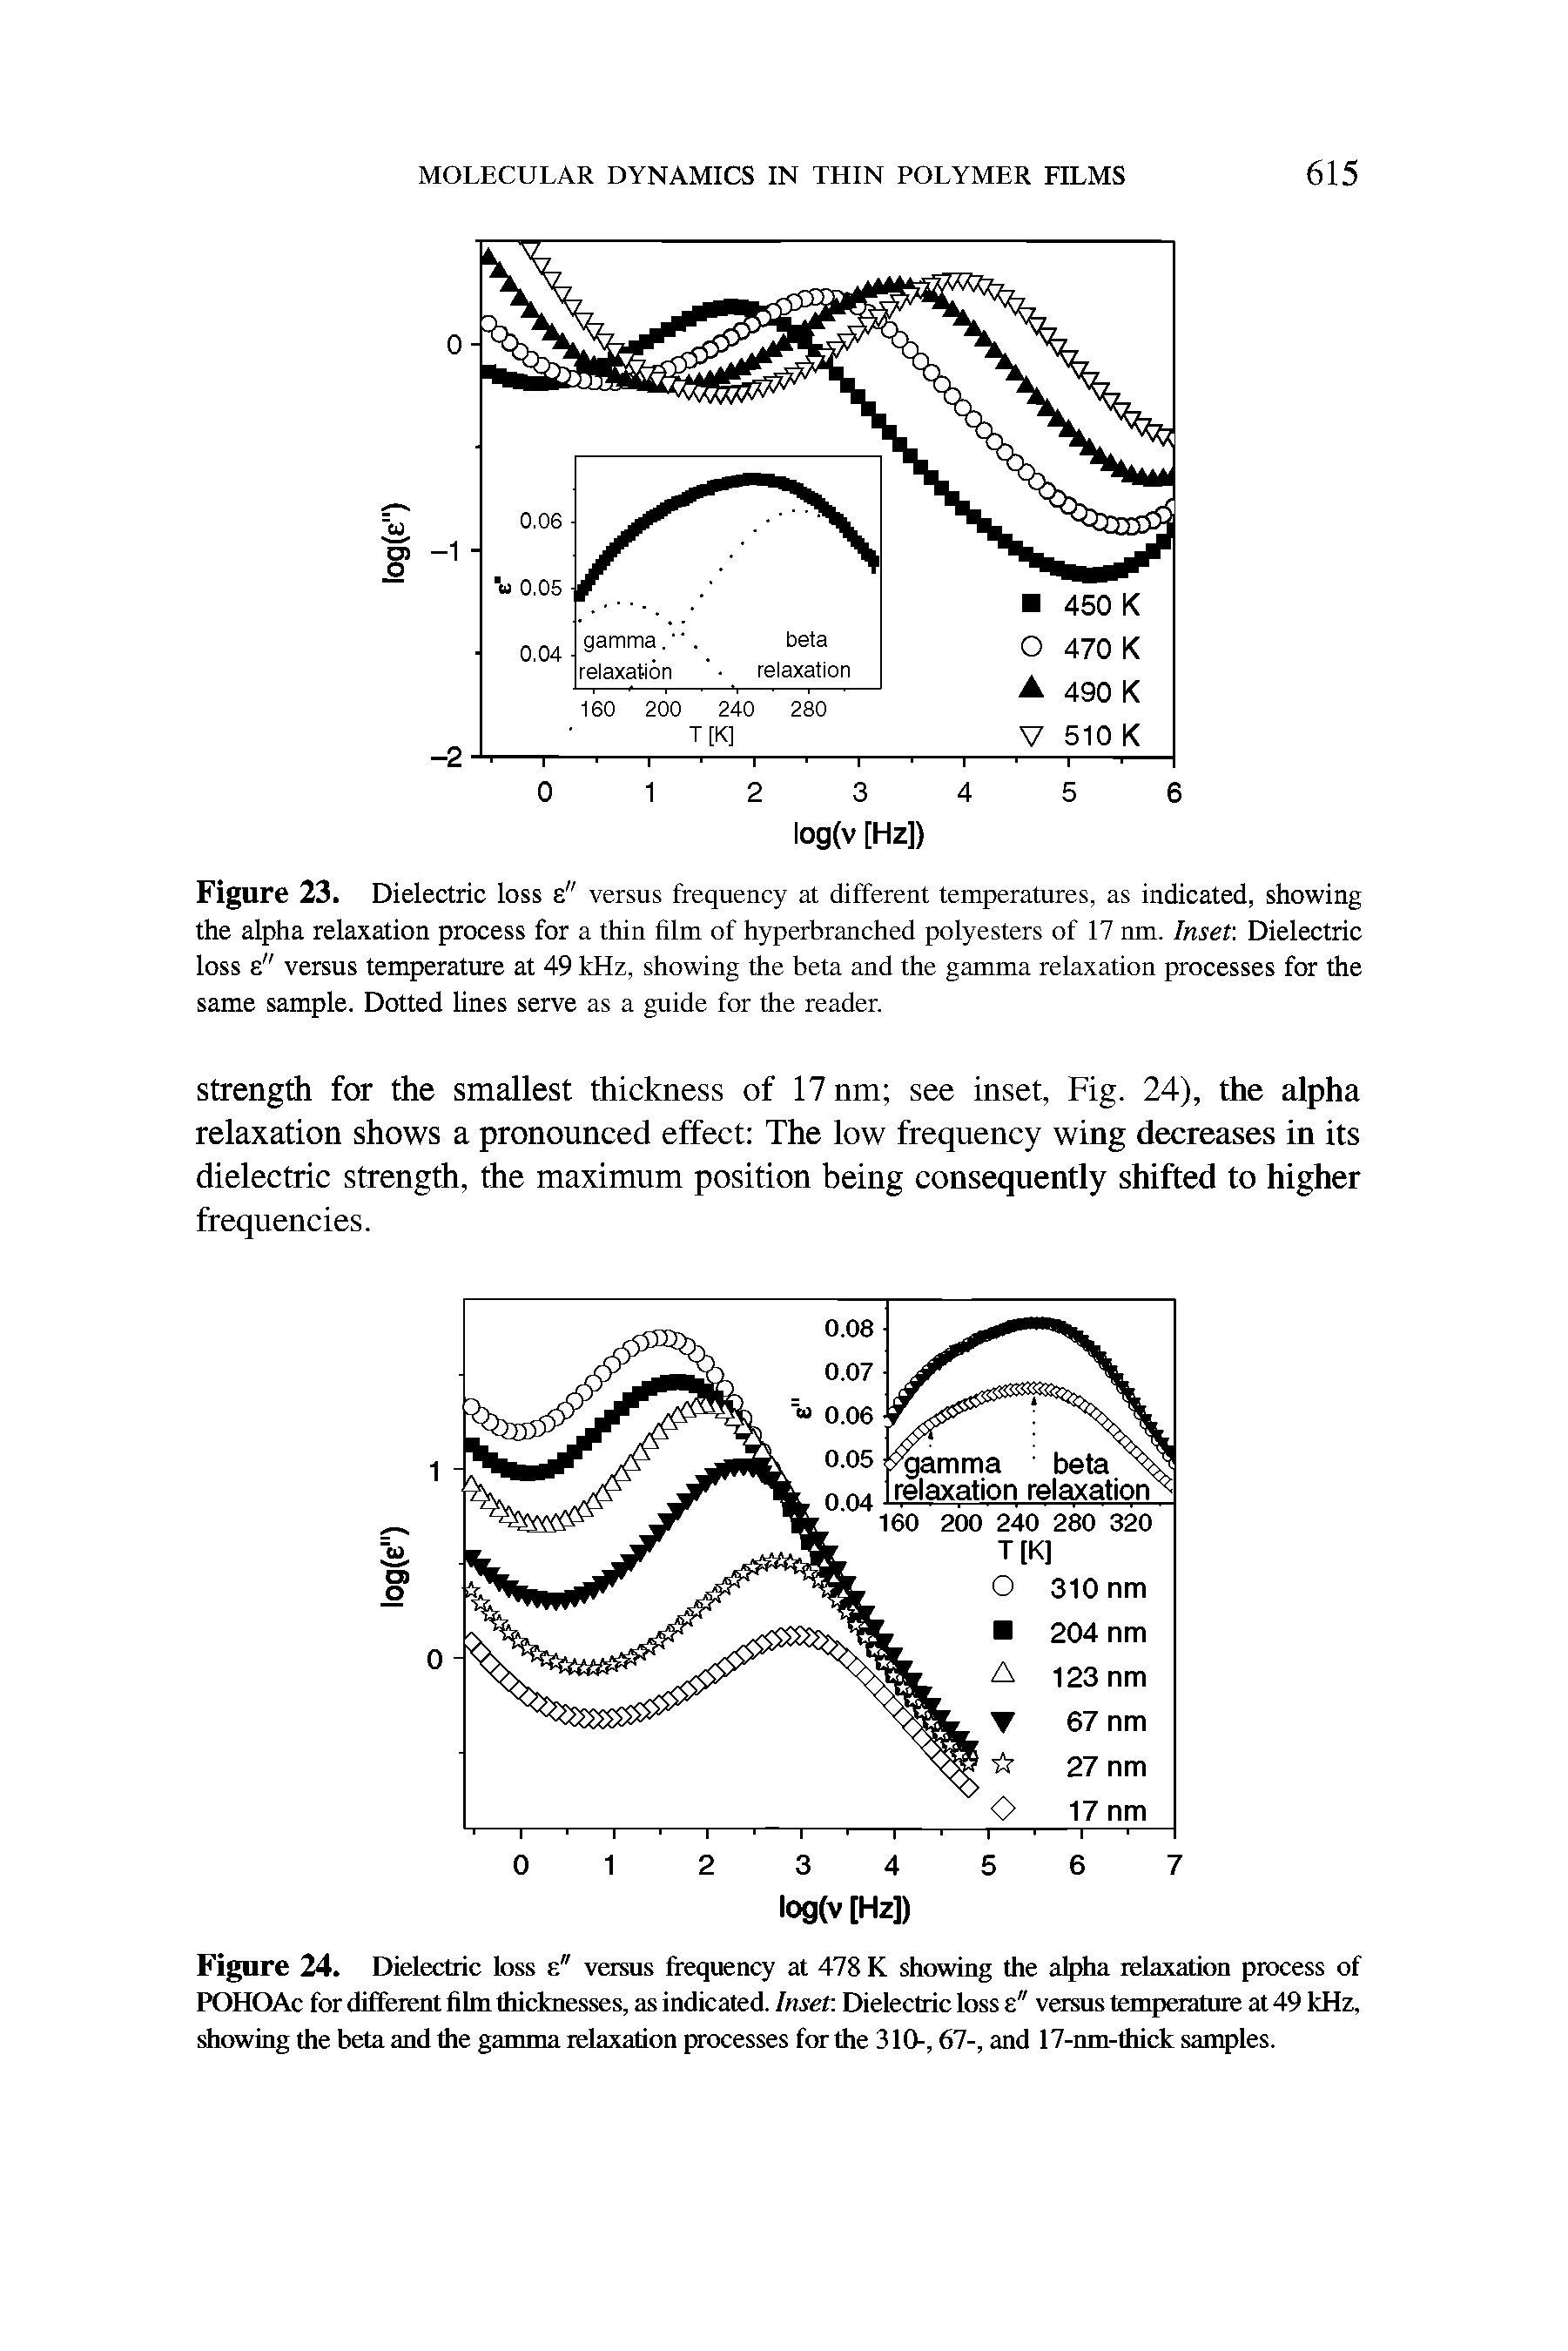 Figure 23. Dielectric loss e" versus frequency at different temperatures, as indicated, showing the alpha relaxation process for a thin film of hyperbranched polyesters of 17 nm. Inset. Dielectric loss e" versus temperature at 49 kHz, showing the beta and the gamma relaxation processes for the same sample. Dotted lines serve as a guide for the reader.